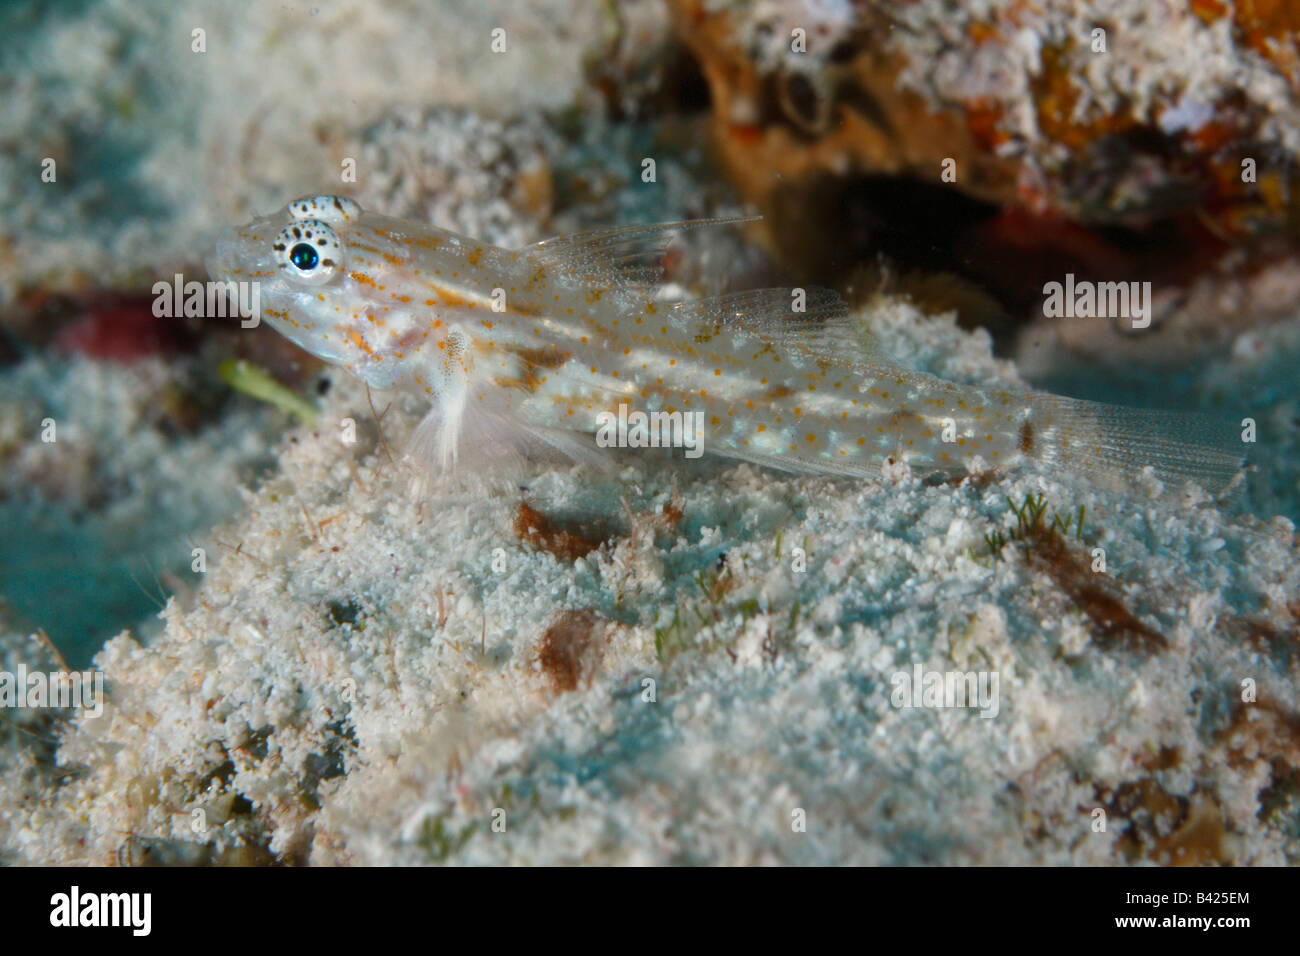 A Tiny Bridled Goby fish lying on the sandy bottom near his coral burrow. Stock Photo